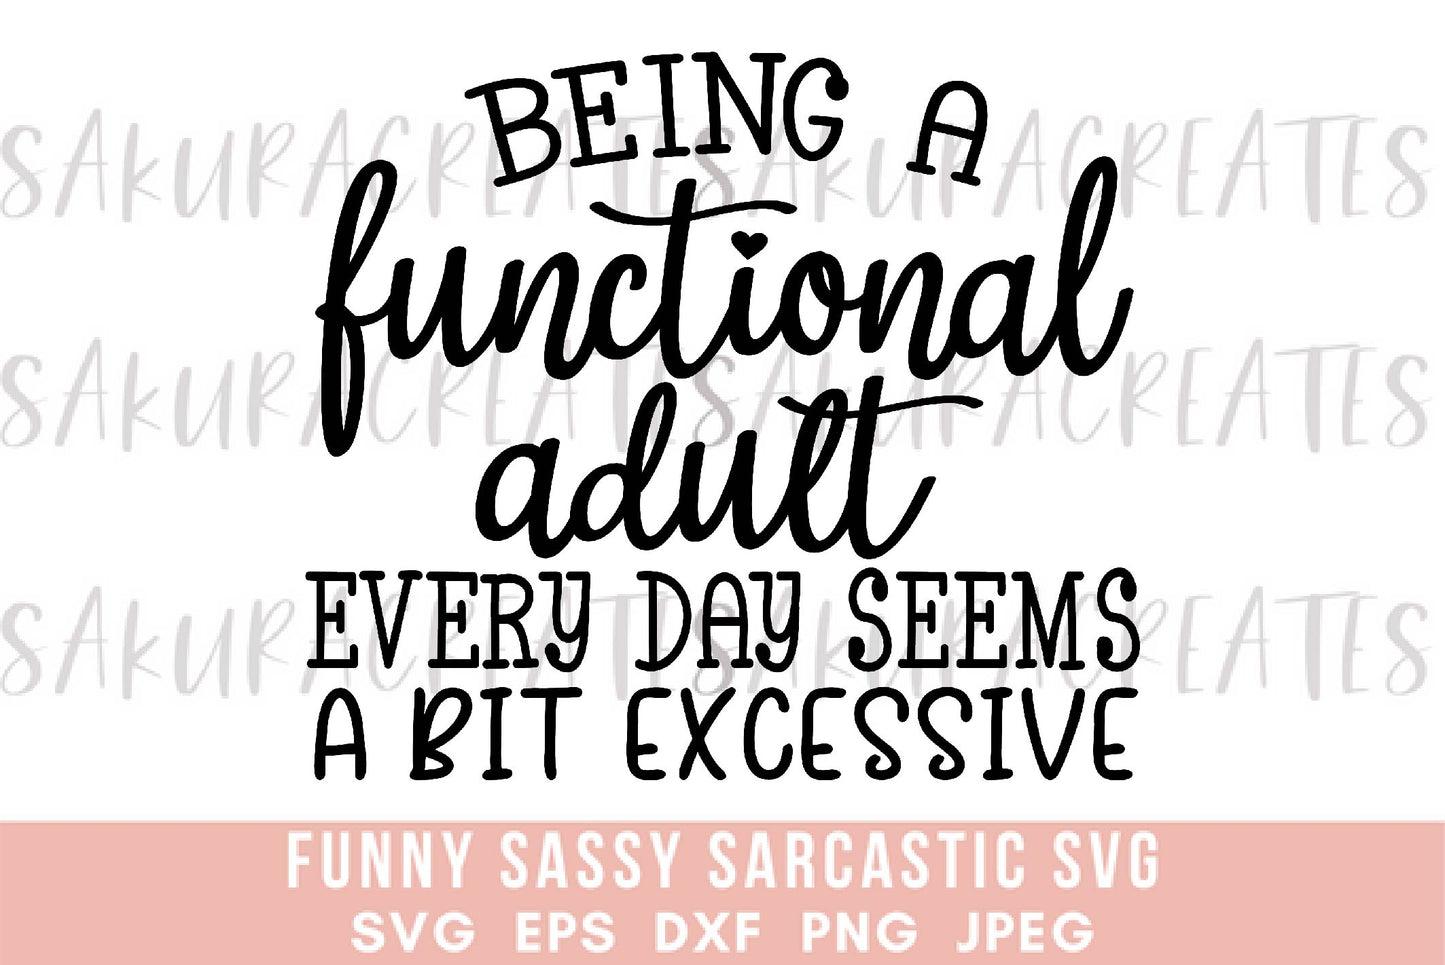 Being a functional adult everyday seems a bit excessive SVG DXF EPS PNG JPEG SVG cut file silhouette cricut funny sarcastic sassy quotes sayings